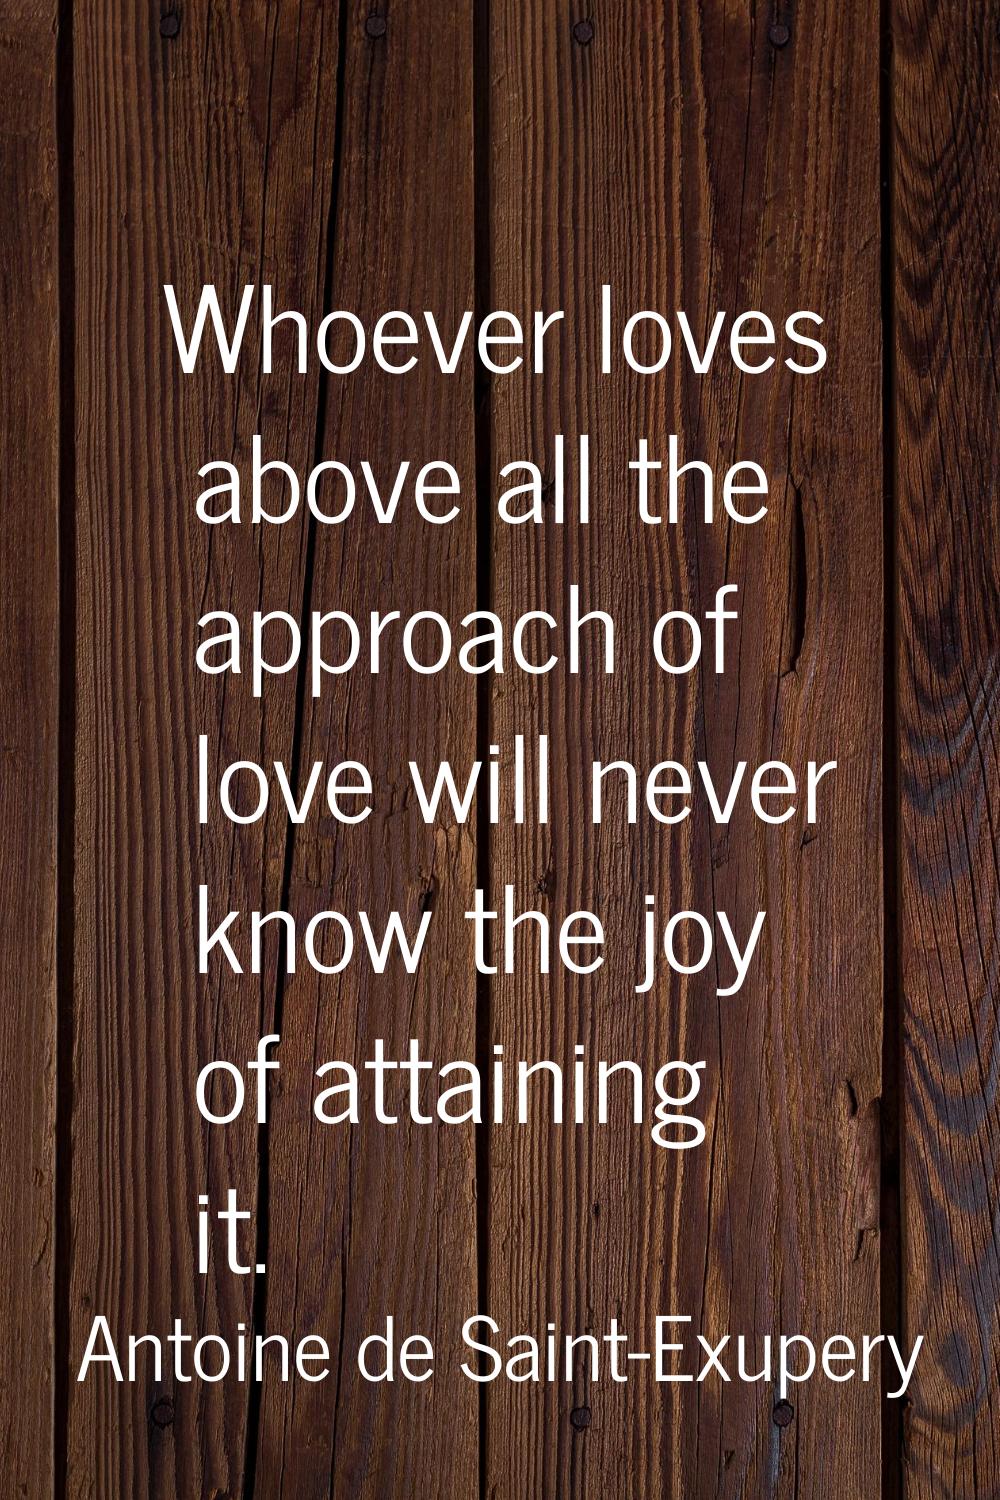 Whoever loves above all the approach of love will never know the joy of attaining it.